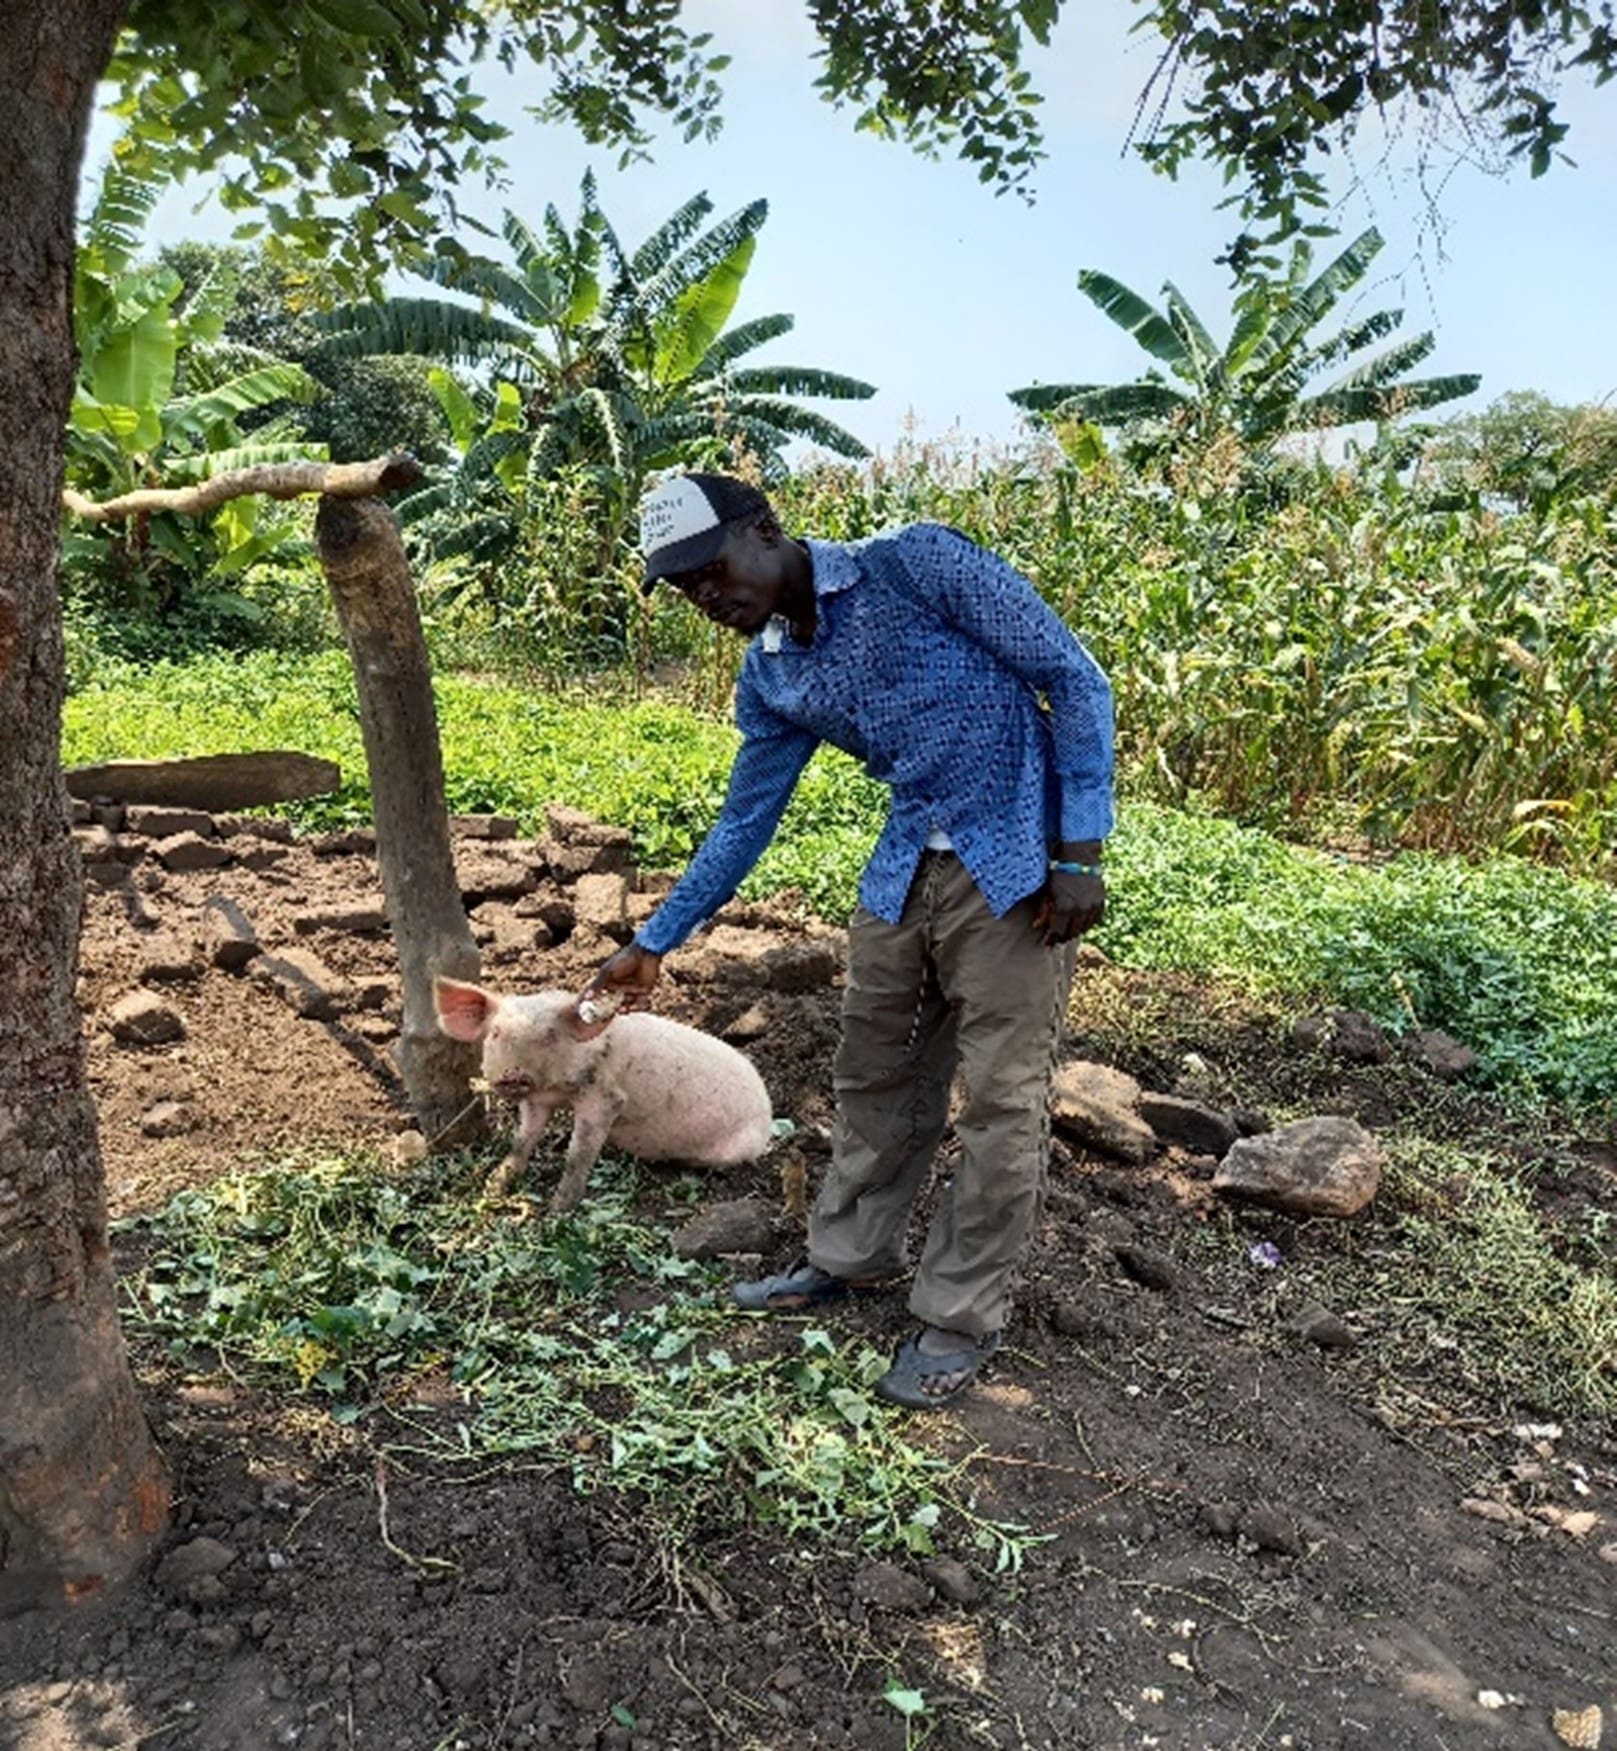 A man stands outdoors with a pig